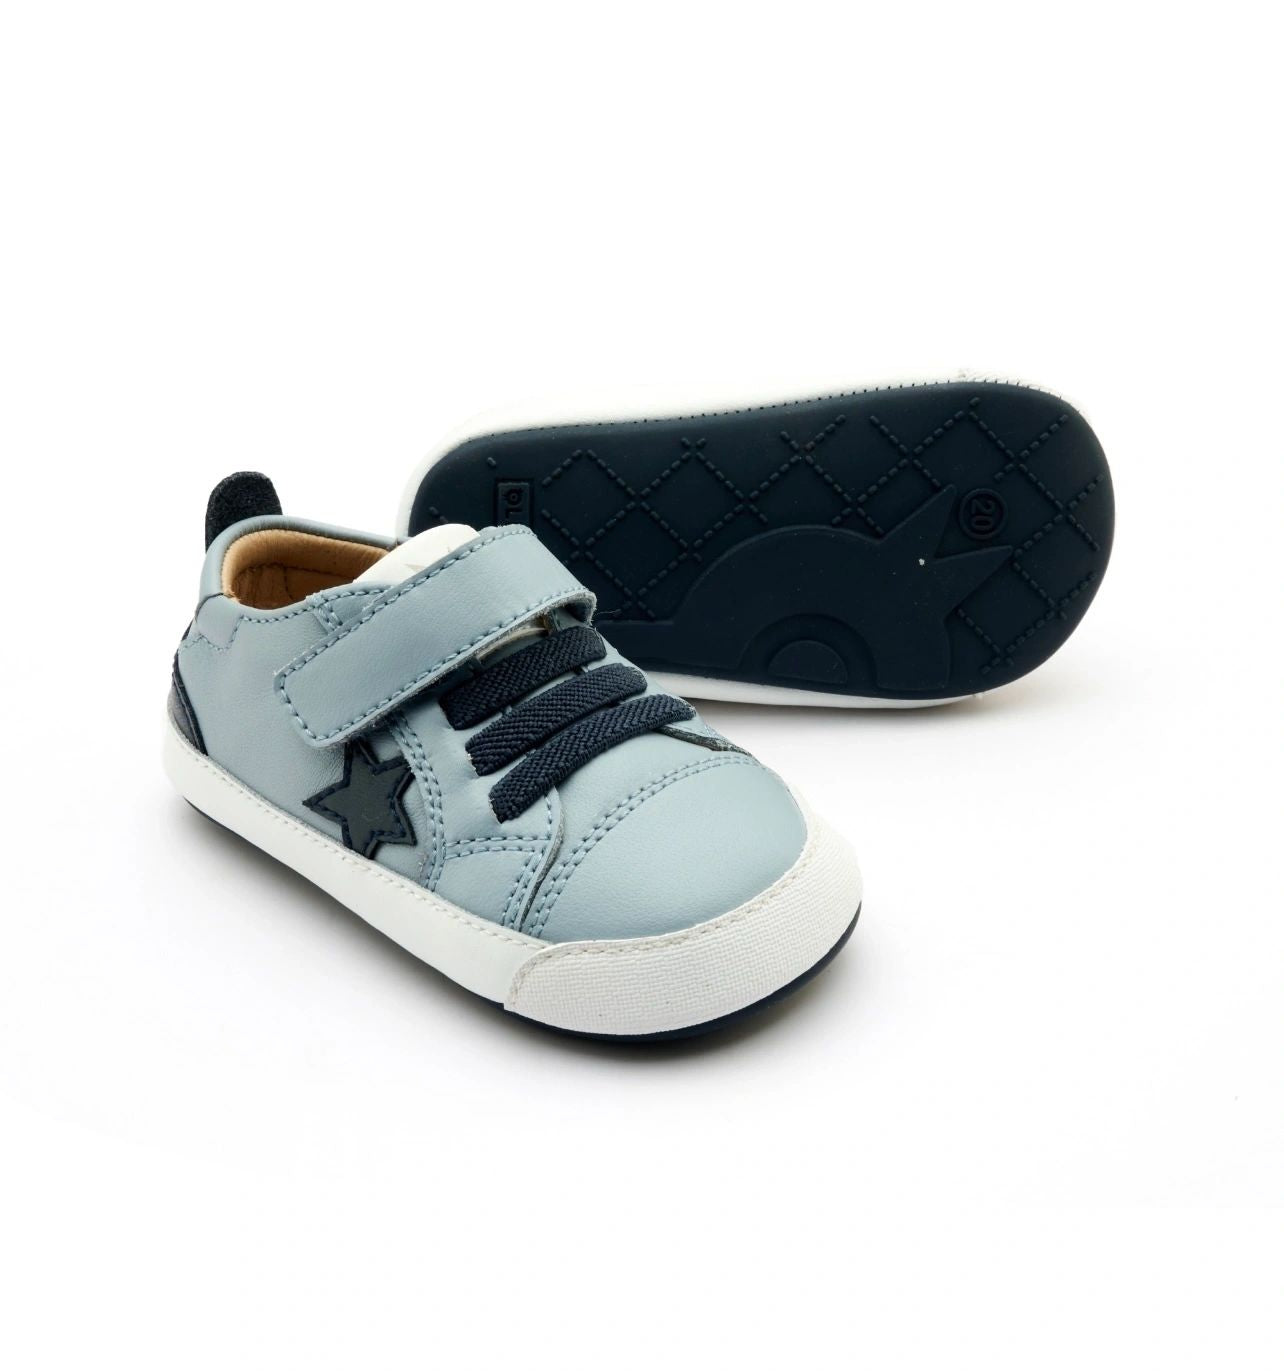 Oldsoles Platinum Bub Baby Star Boys Soft Sole Sneakers Tennis Shoes - DUSTY BLUE / NAVY / NAVY SOLE